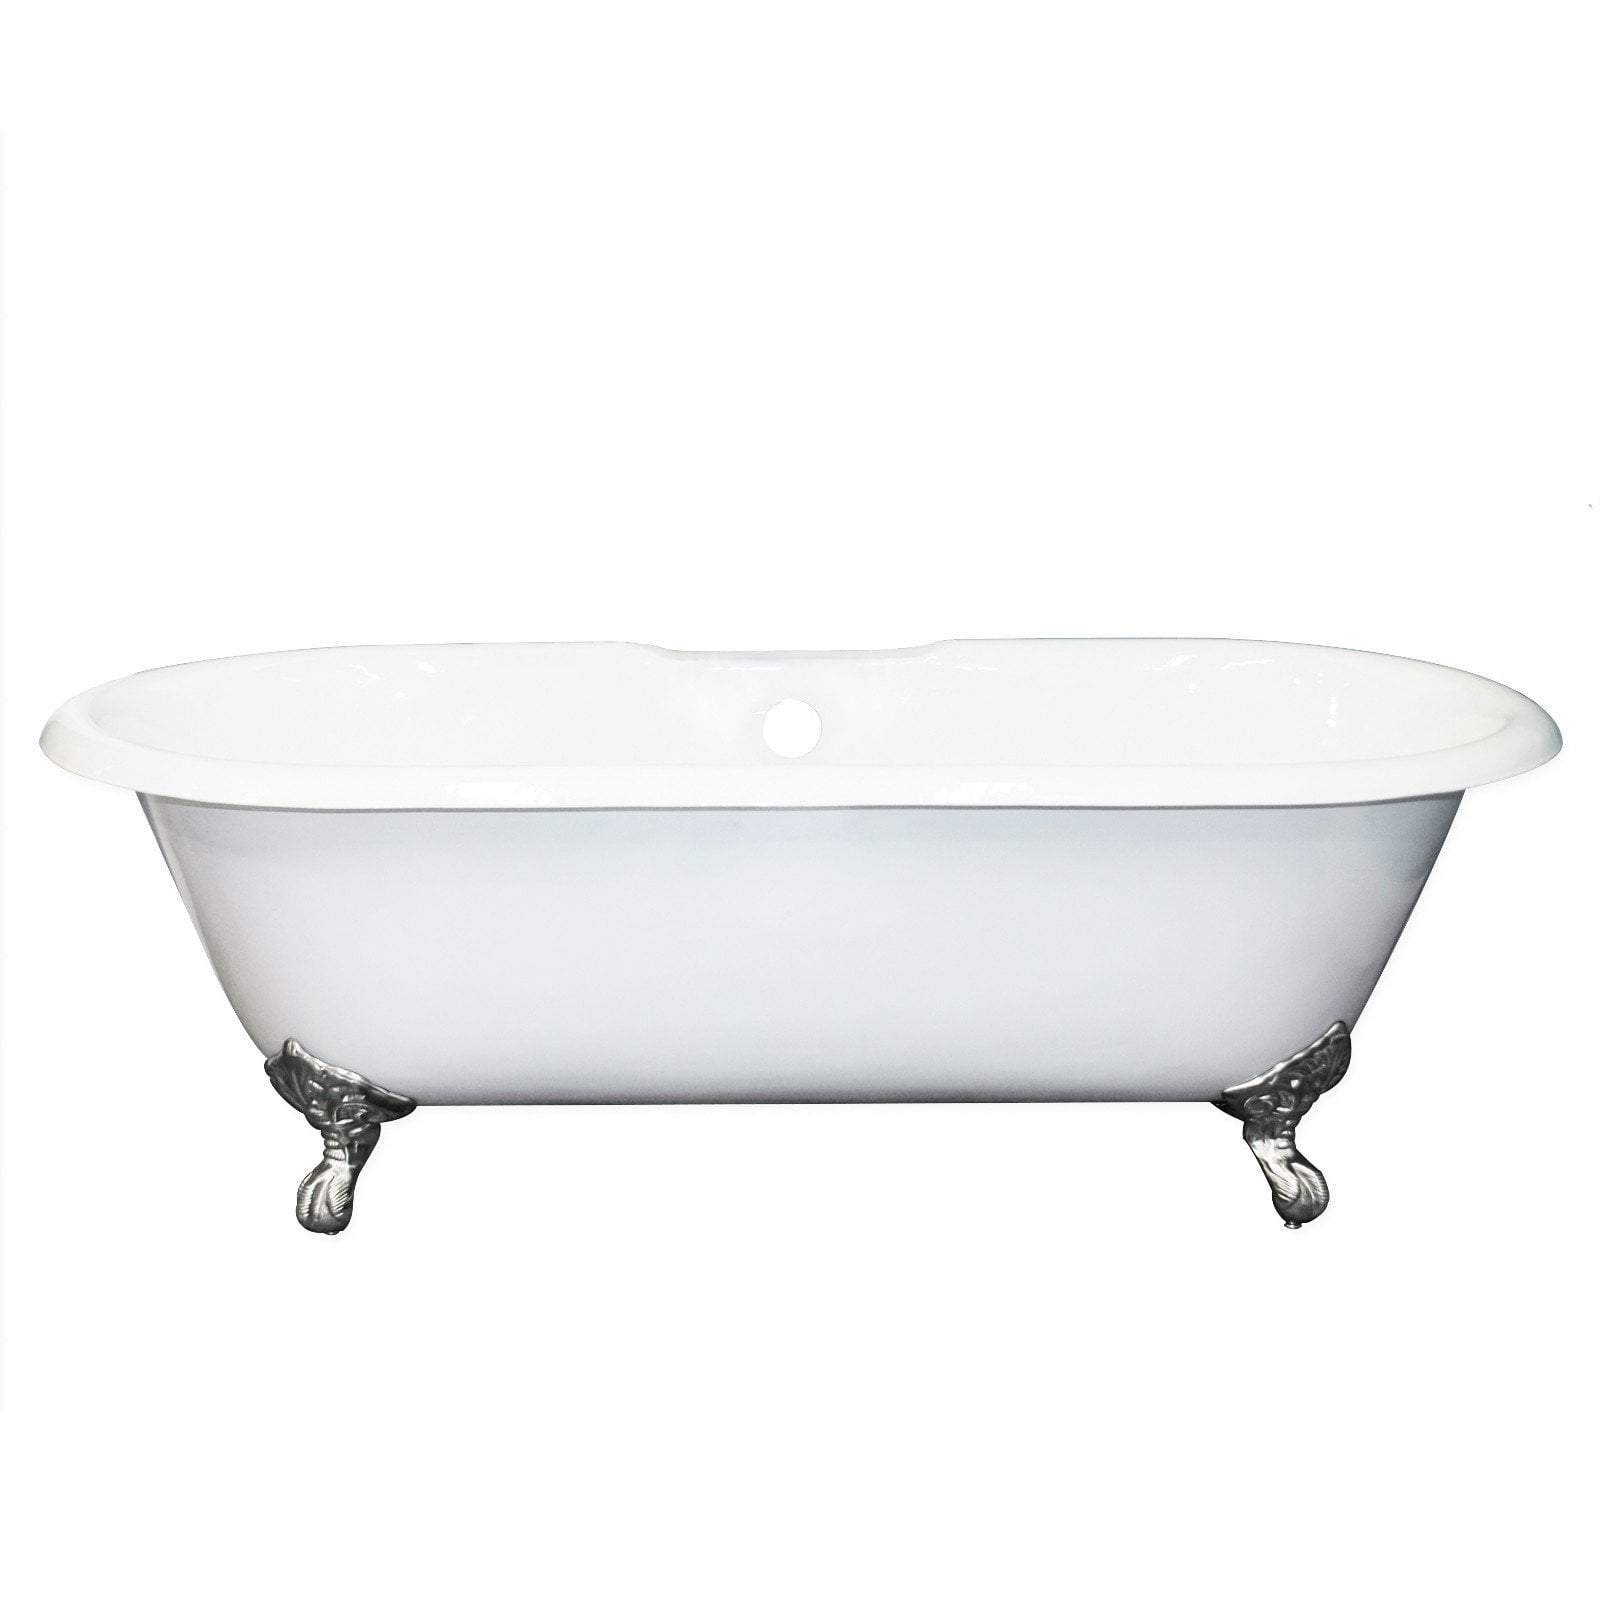 67" Cast Iron Double Ended Clawfoot Tub, Deck Mount Faucet Drillings